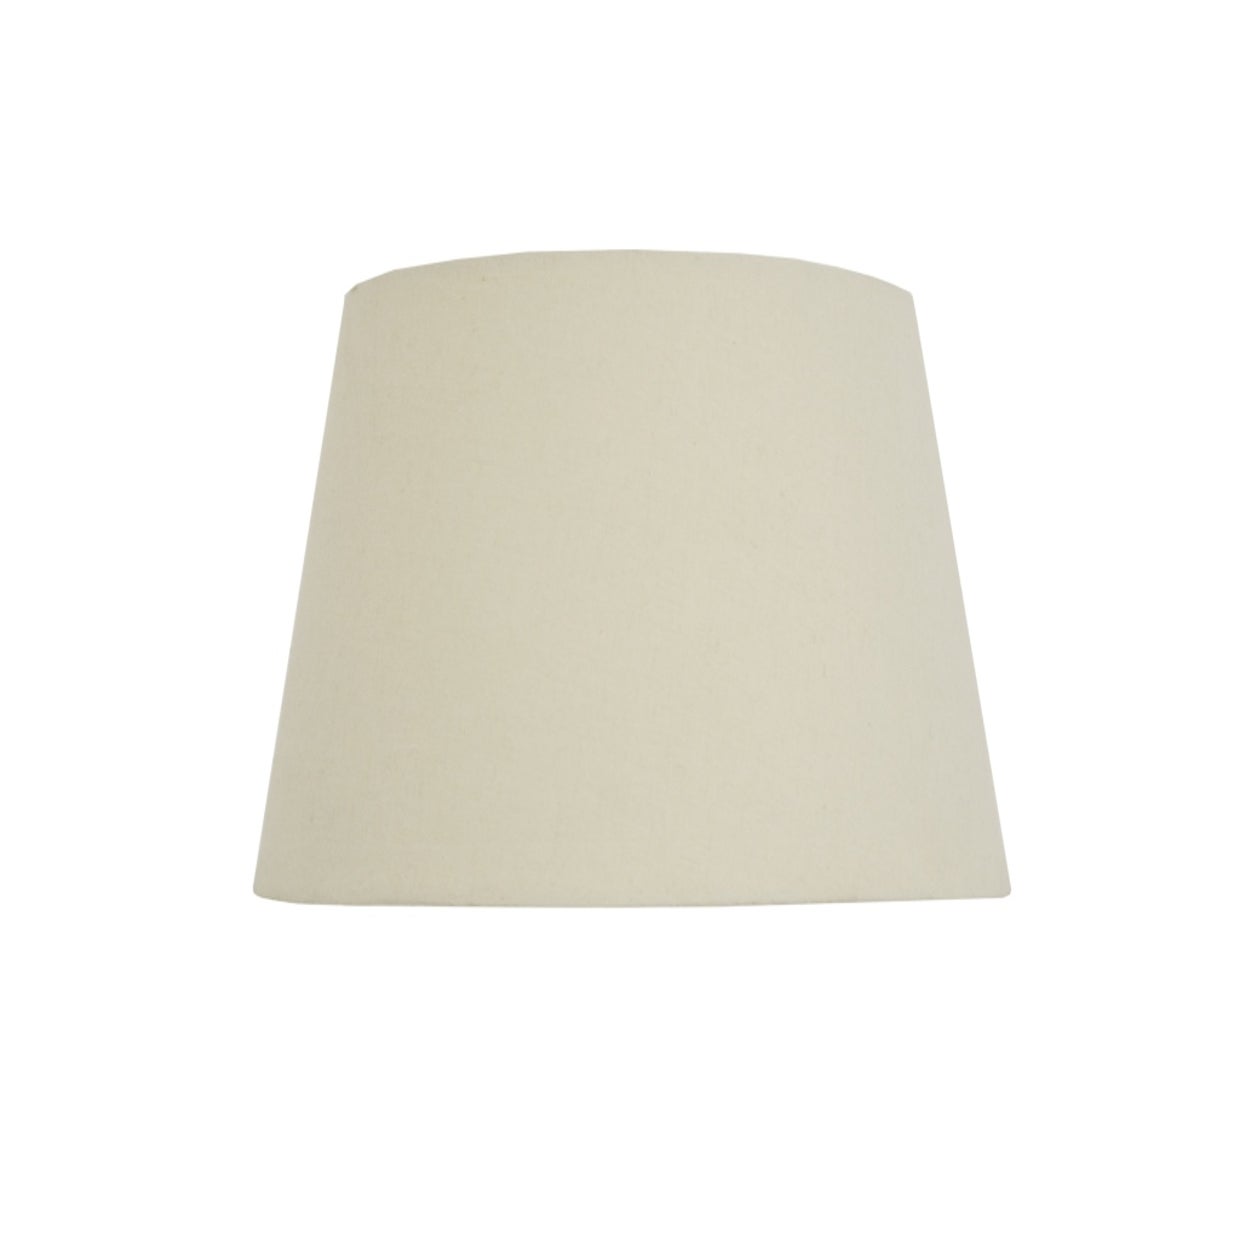 OATMEAL 36CM TAPERED DRUM LAMPSHADE